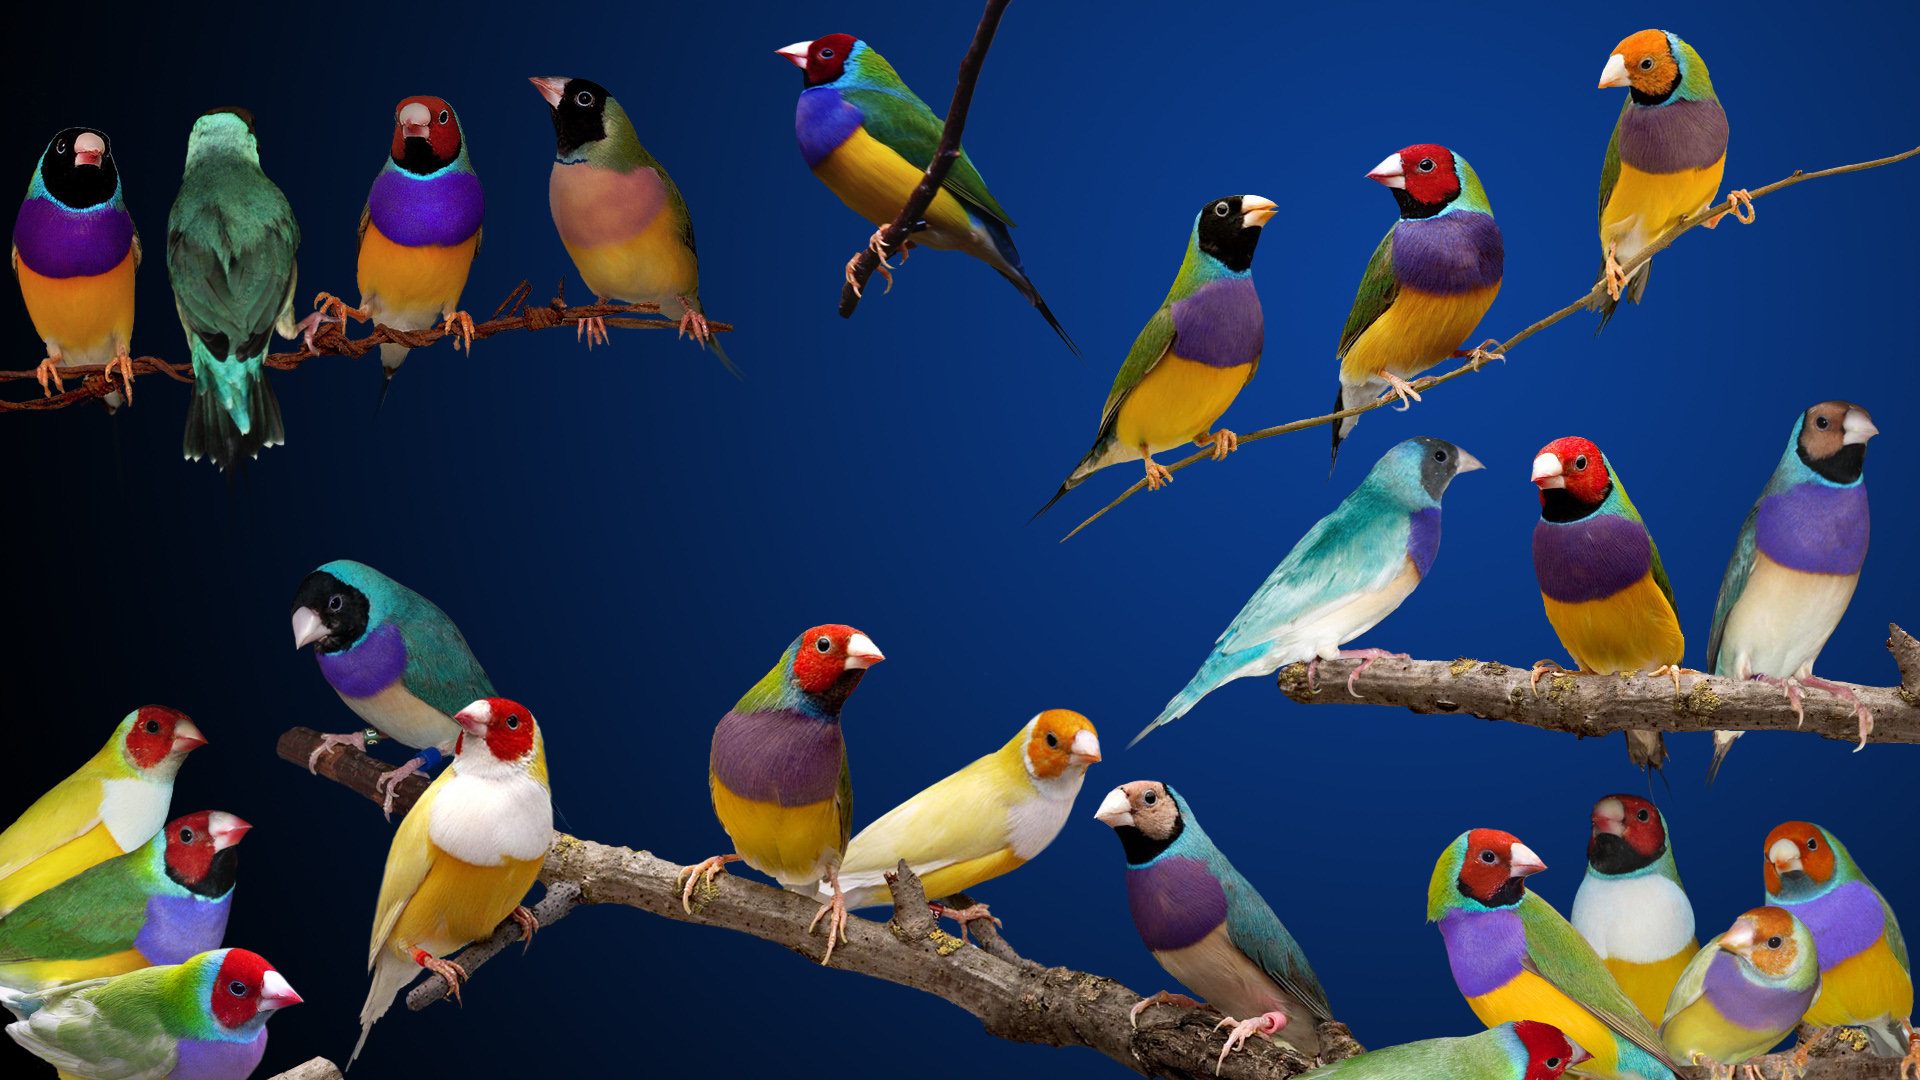 Gouldian Finches 1920x1080